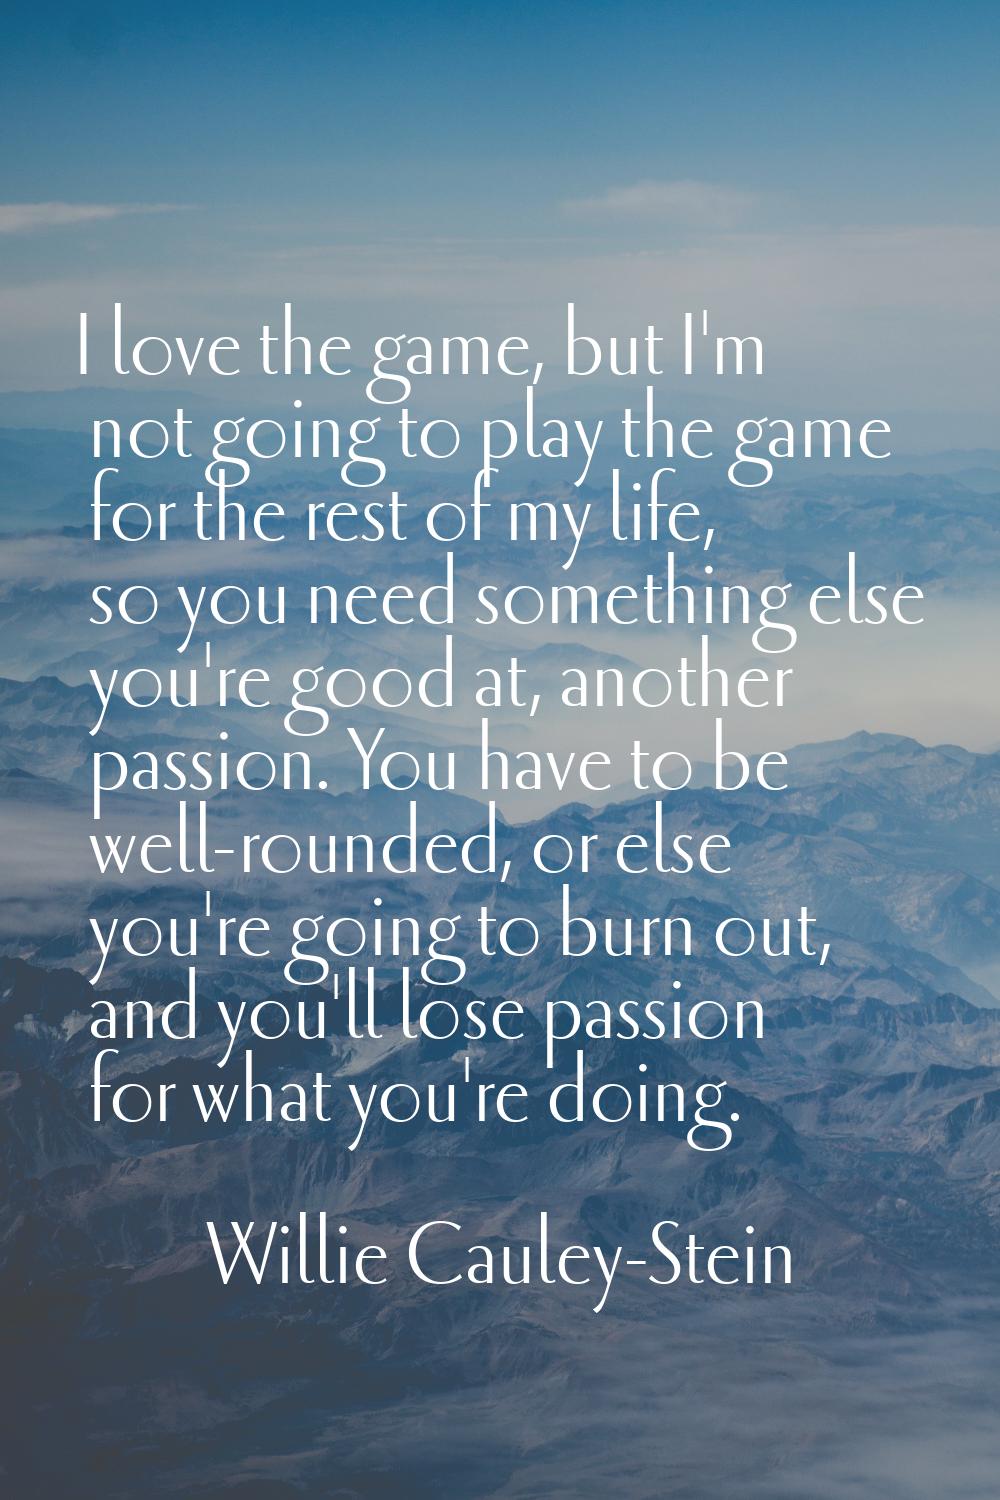 I love the game, but I'm not going to play the game for the rest of my life, so you need something 